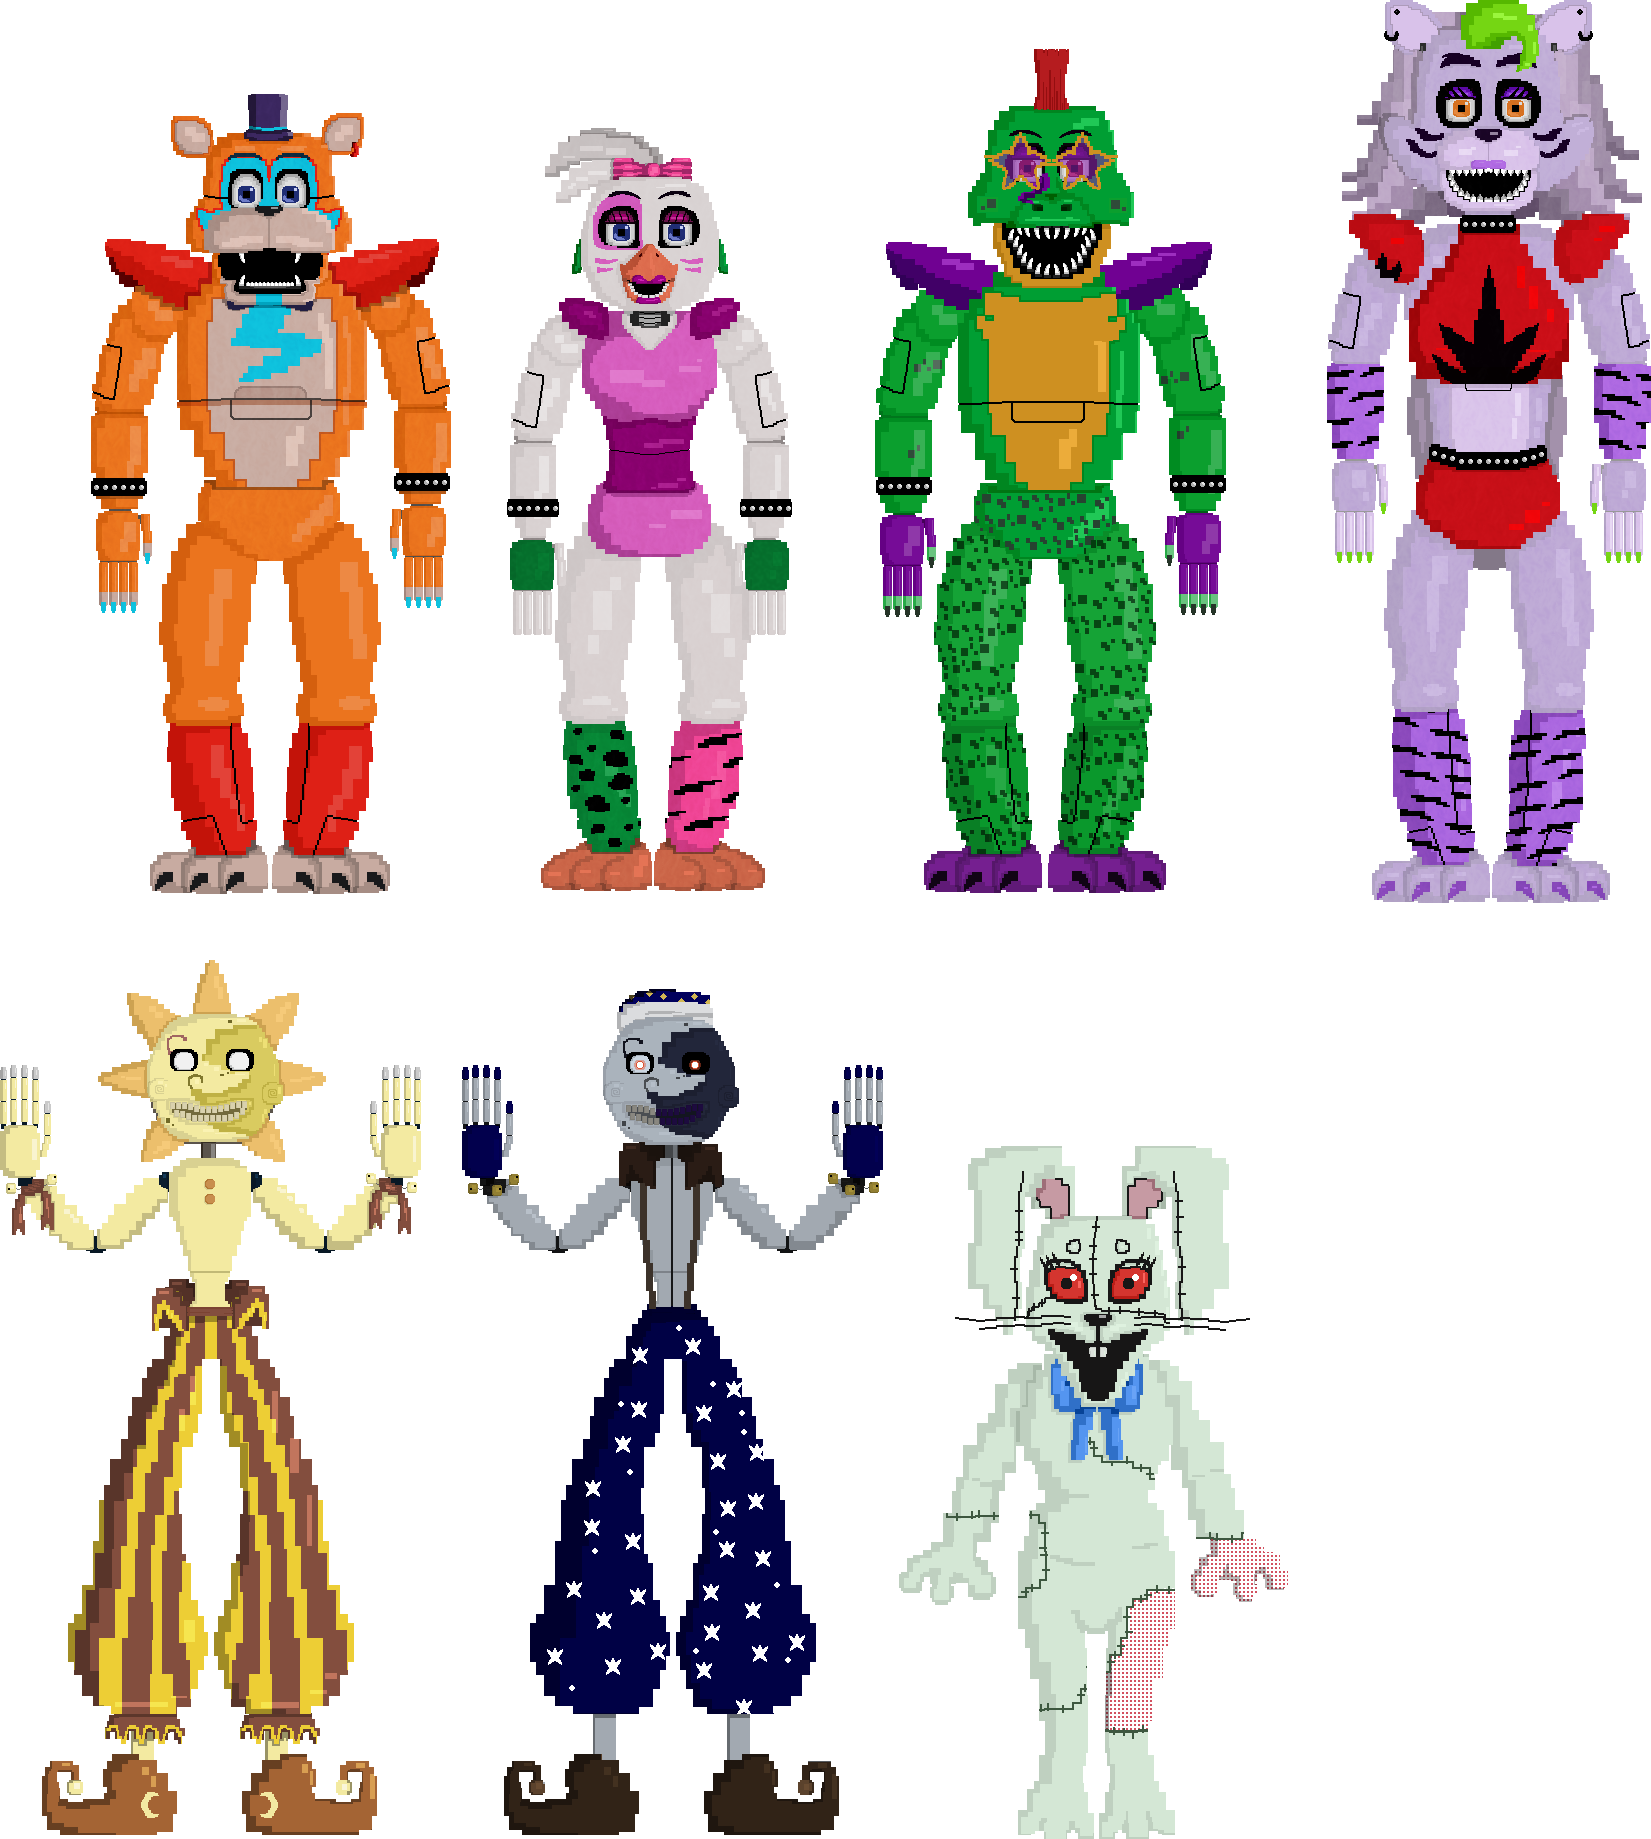 2D FNaF Sister Location [part 1] by FoxyLISOfficial on DeviantArt